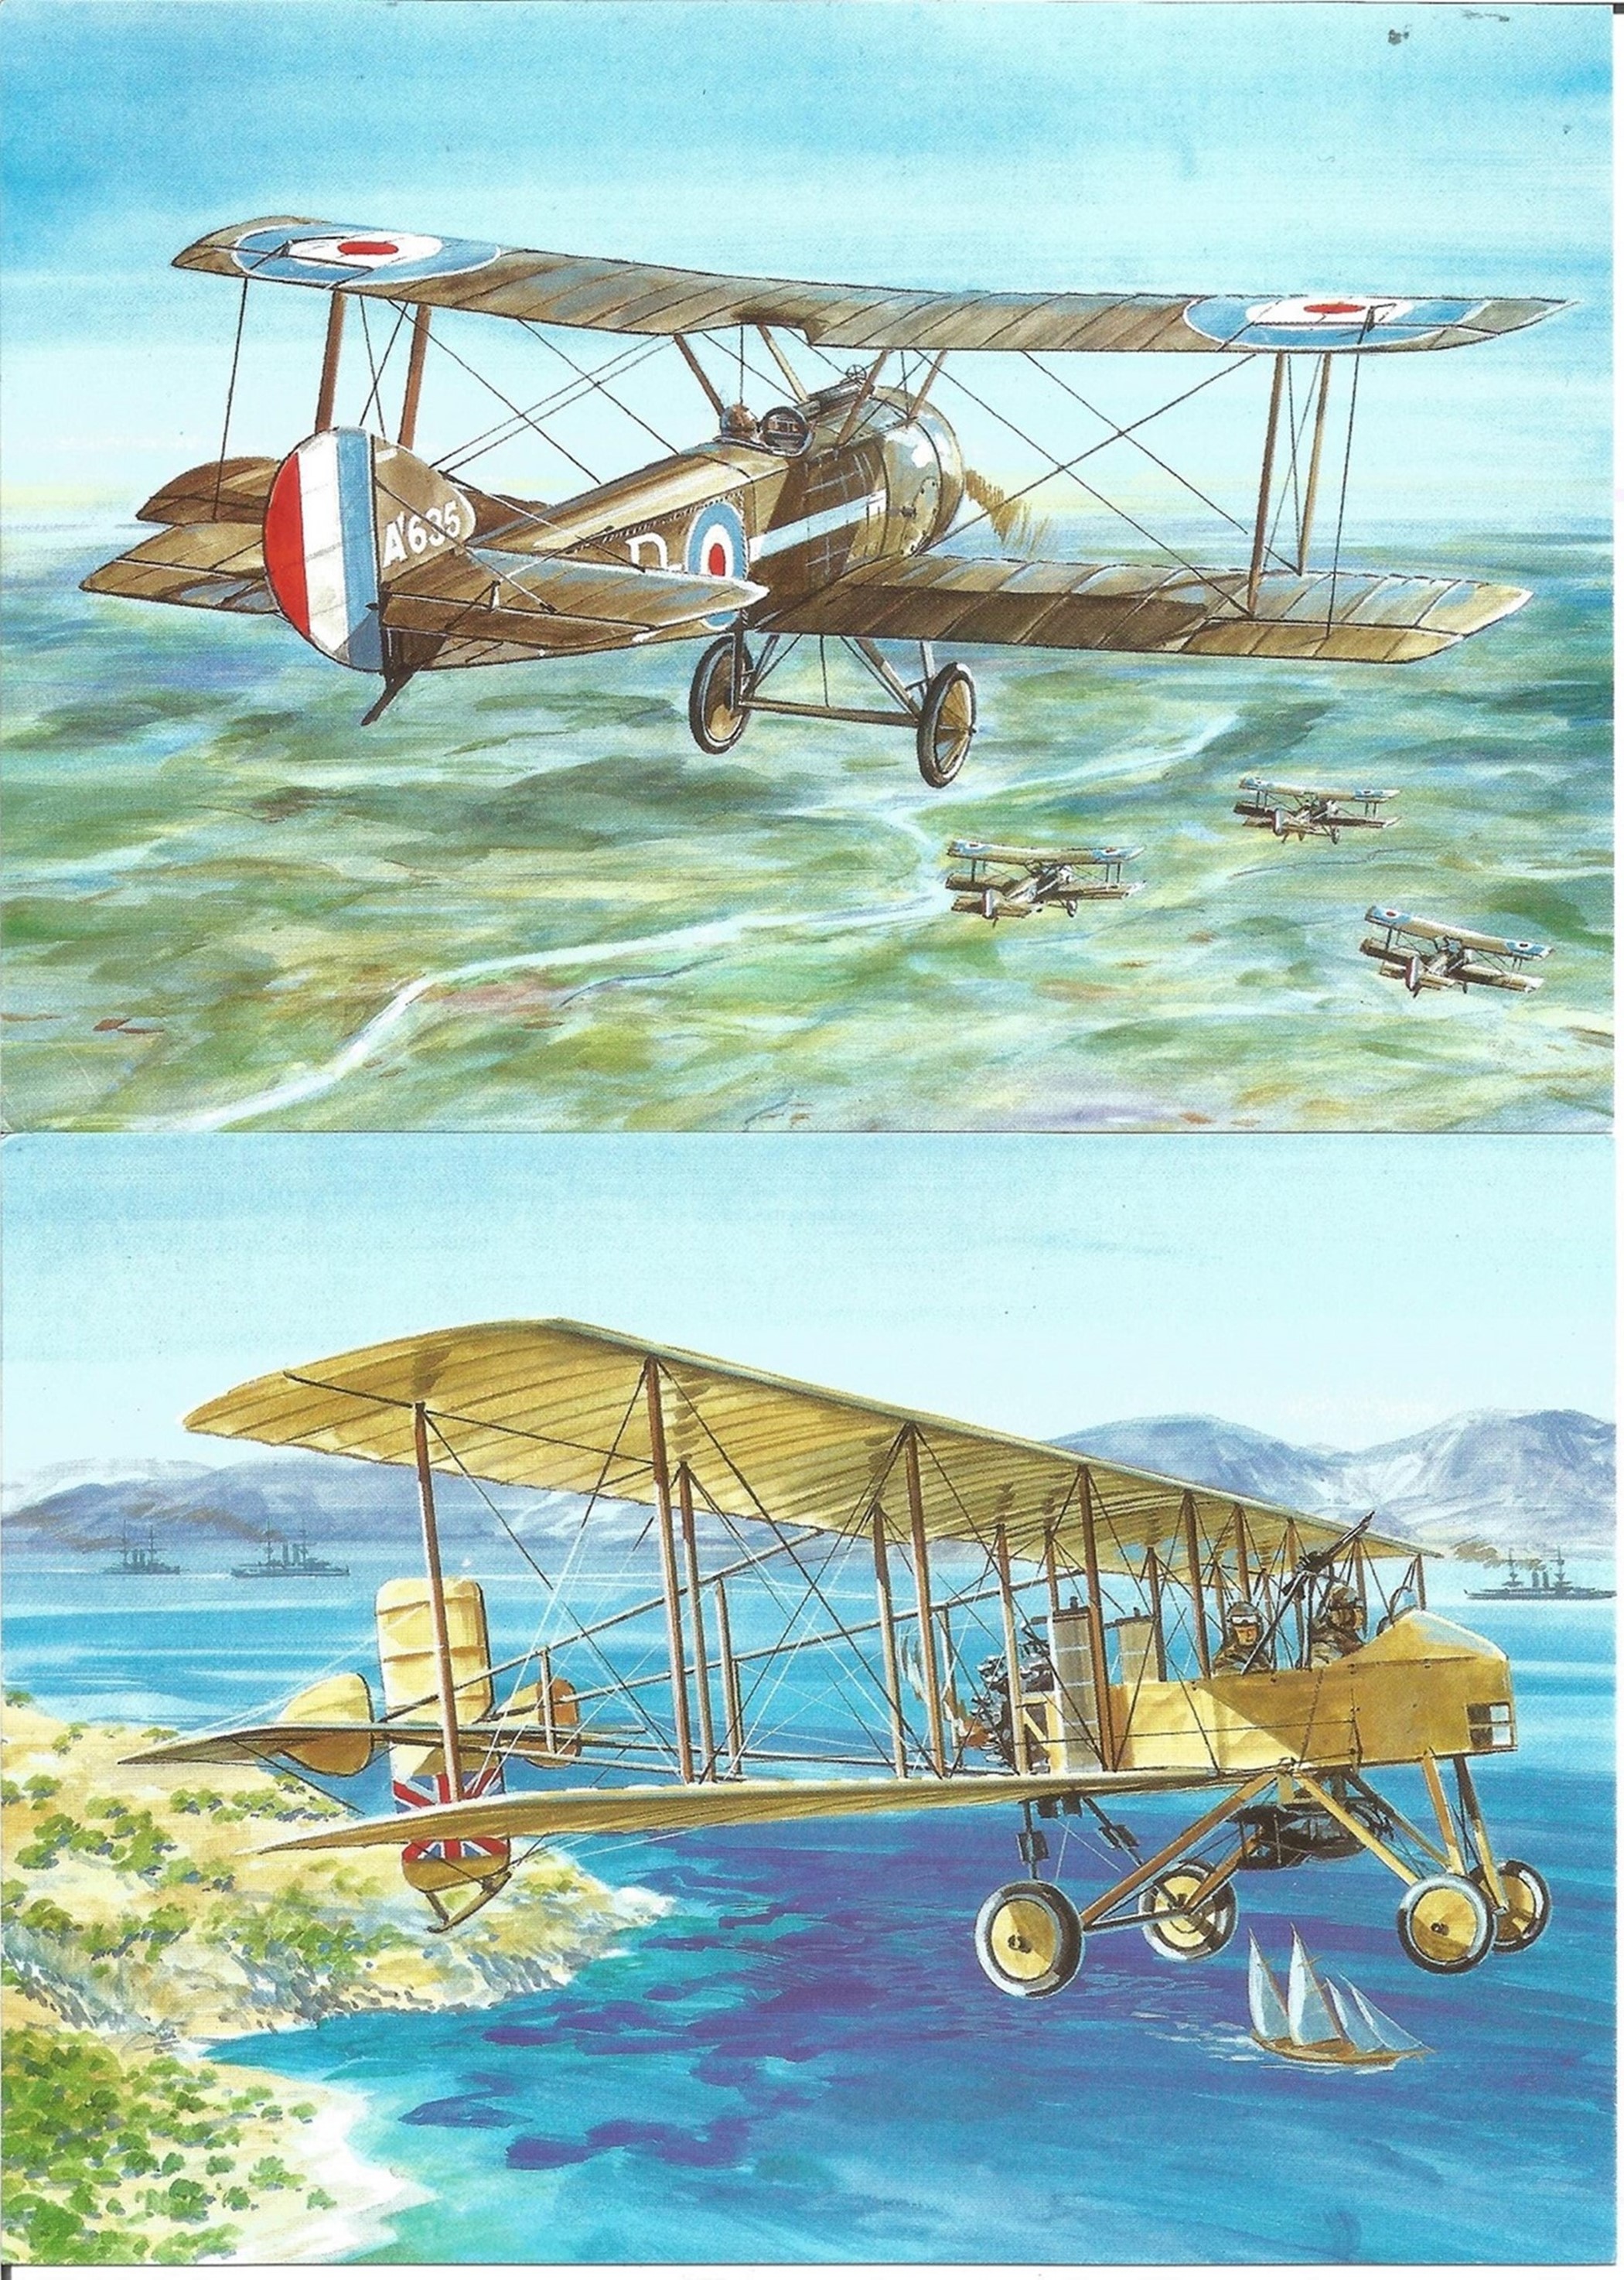 Collection of 6 Postcards Featuring Aeroplanes of the Great War, Biplanes Include Lloyd C1, - Image 3 of 3